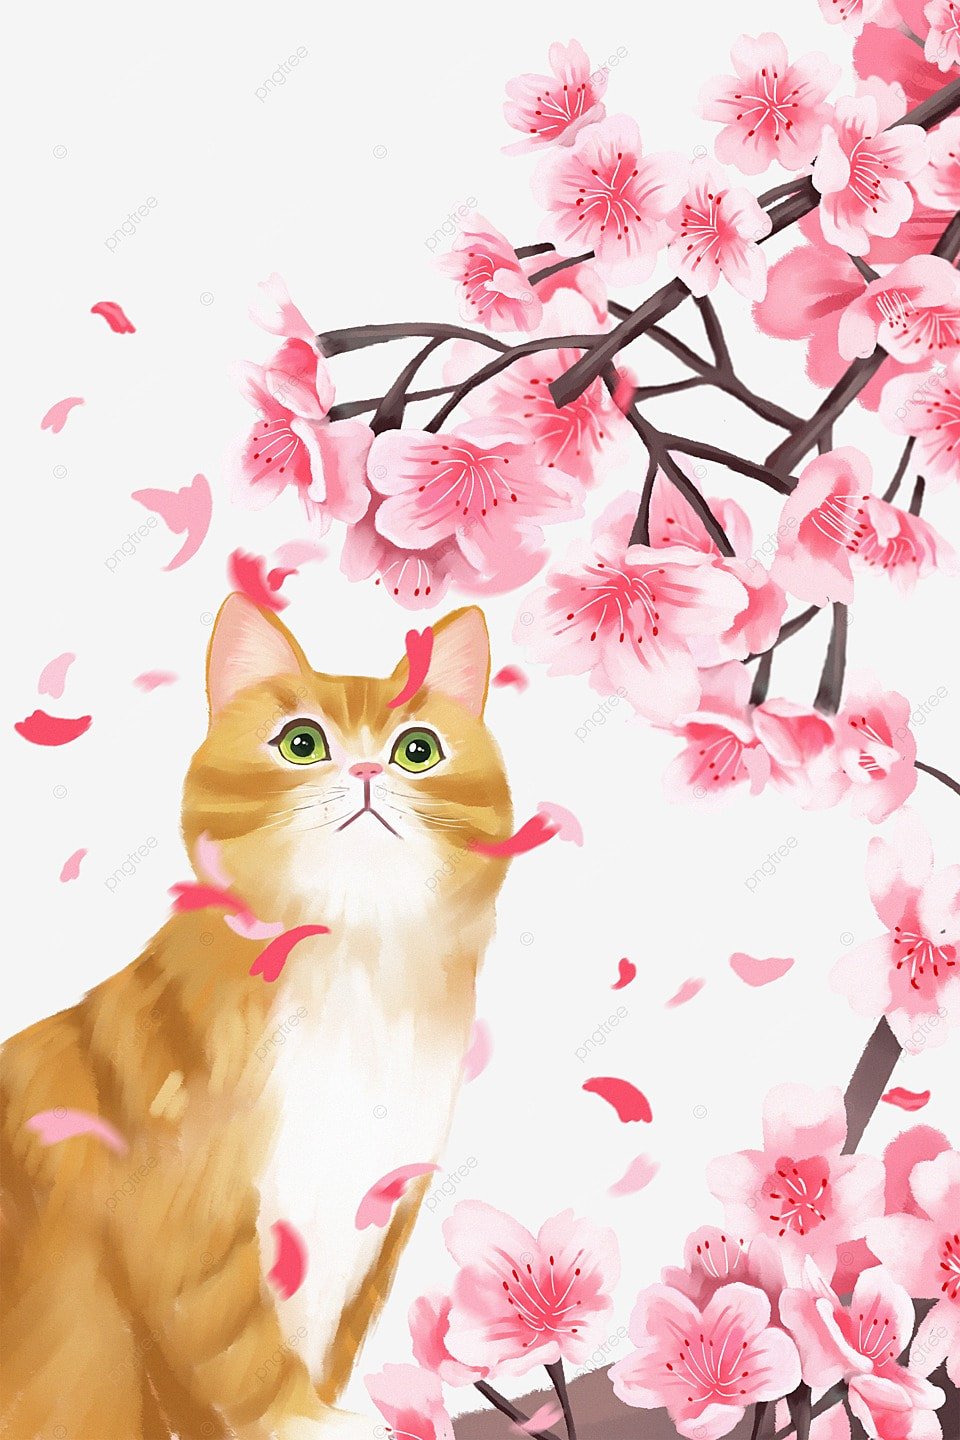 pngtree-cherry-blossom-cherry-tree-plant-cat-png-image_3913007.jpg